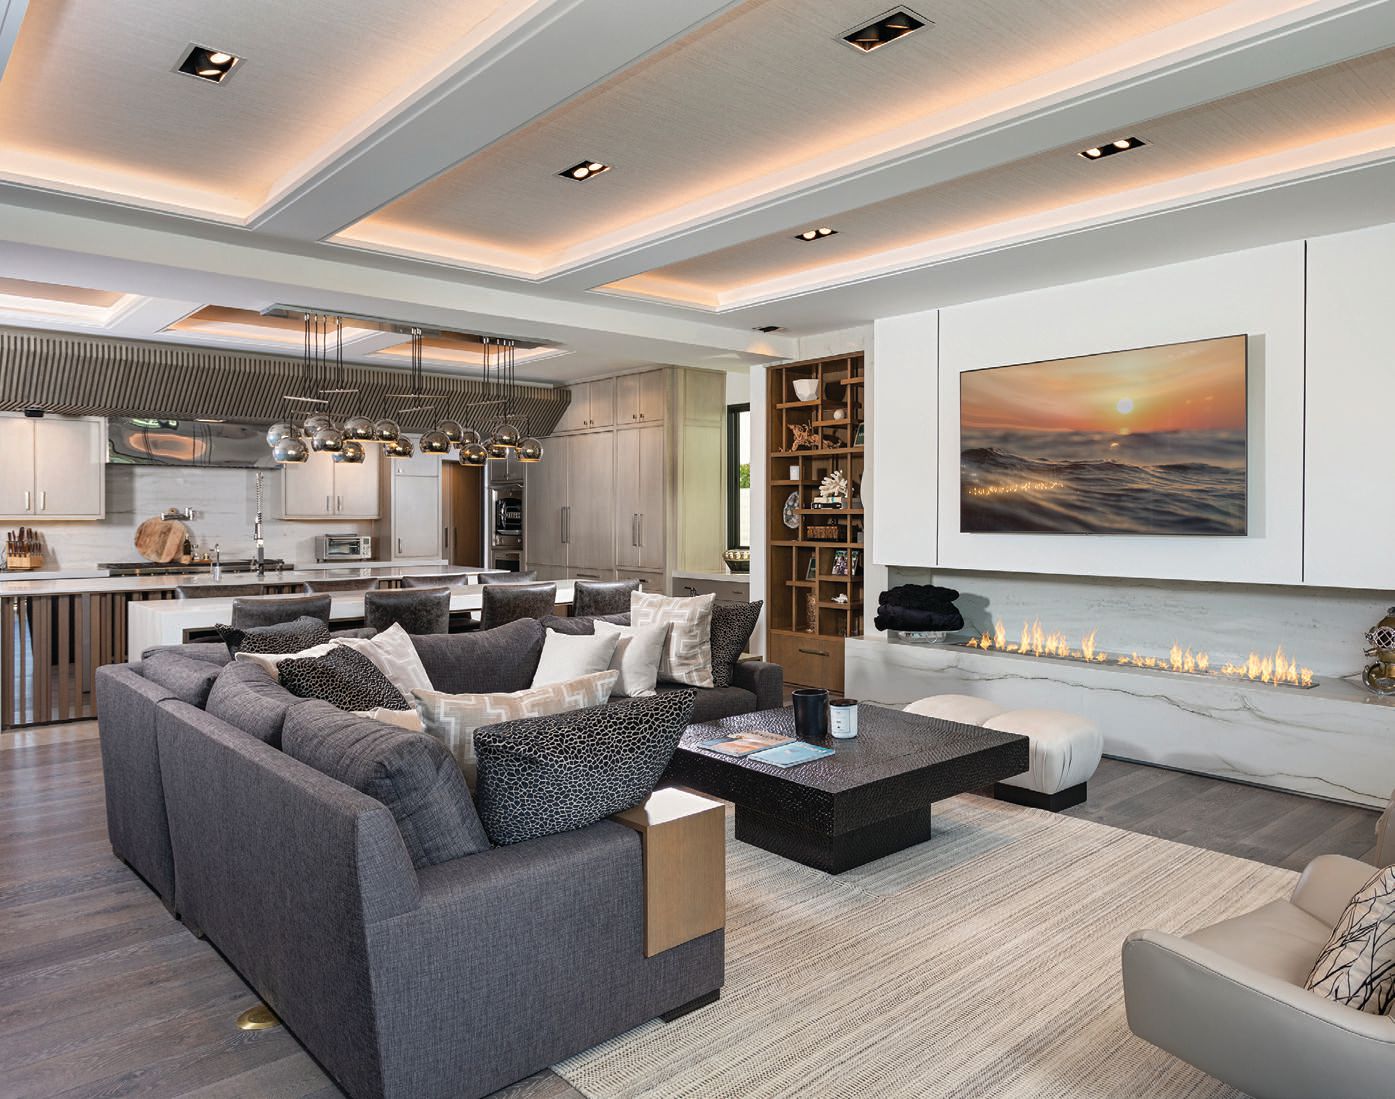 The sleek living room is connected to the gourmet chef’s kitchen. PHOTO BY ADAM DUBICH